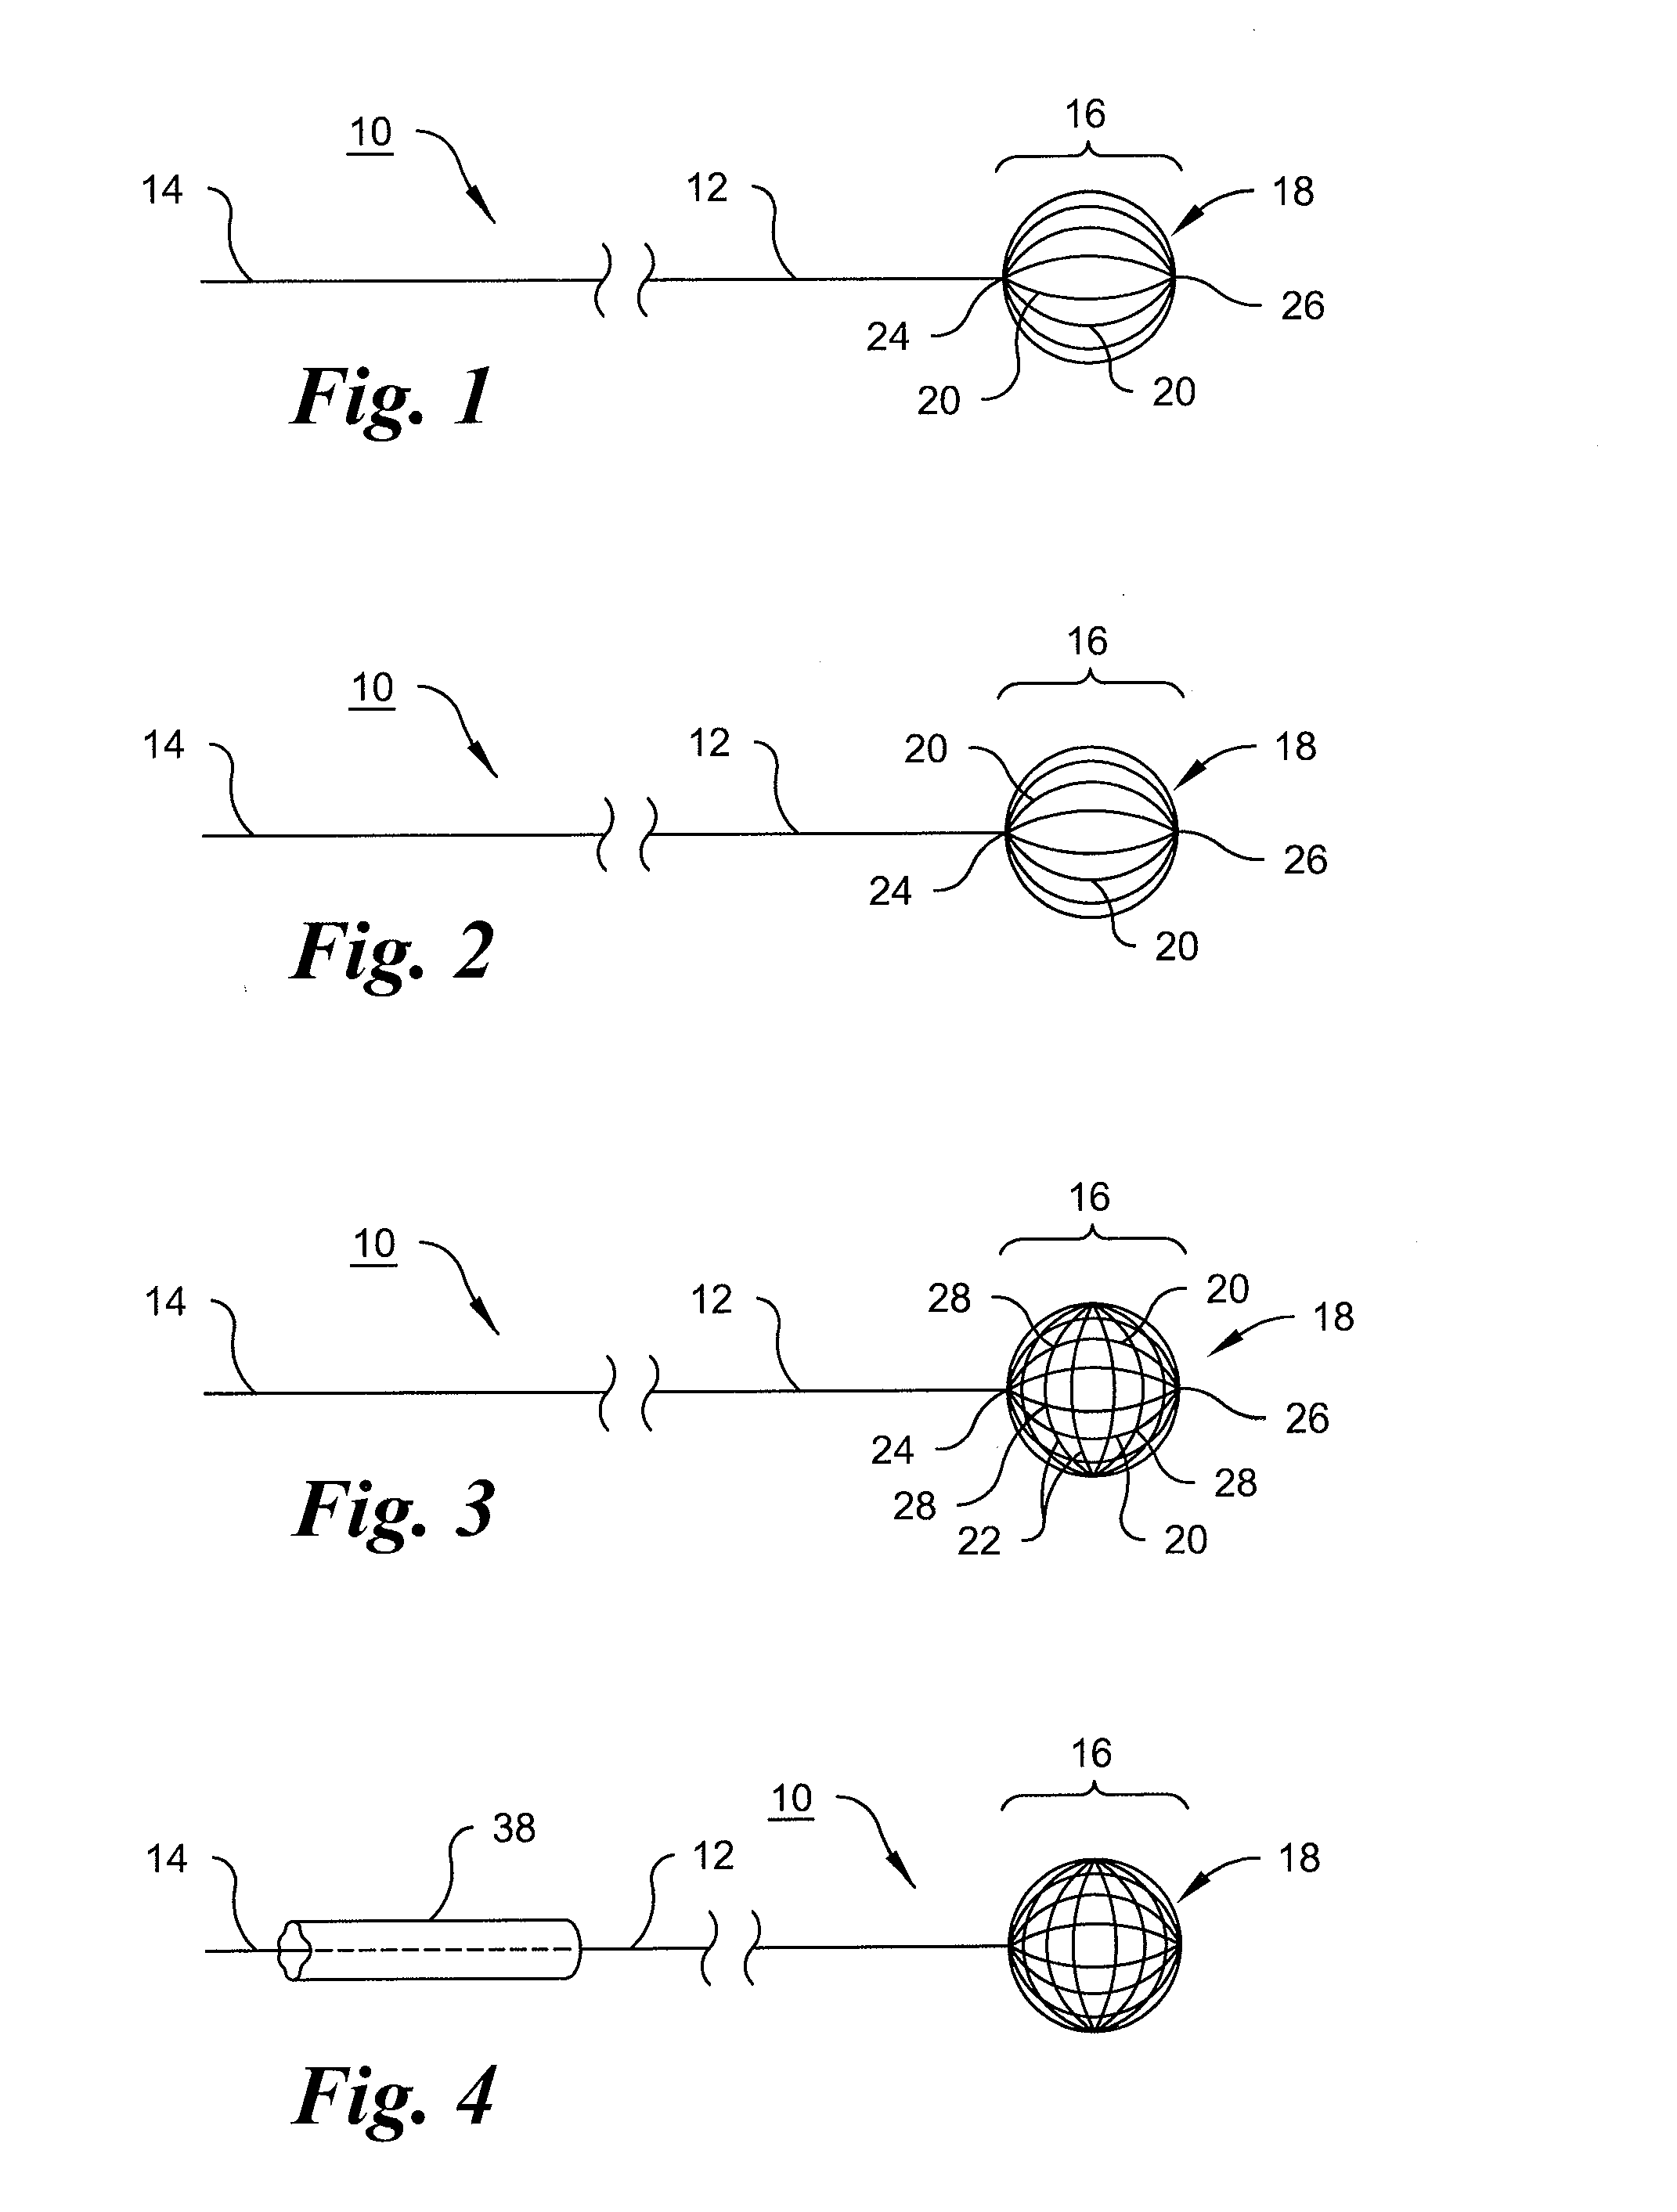 Anatomic device delivery and positioning system and method of use